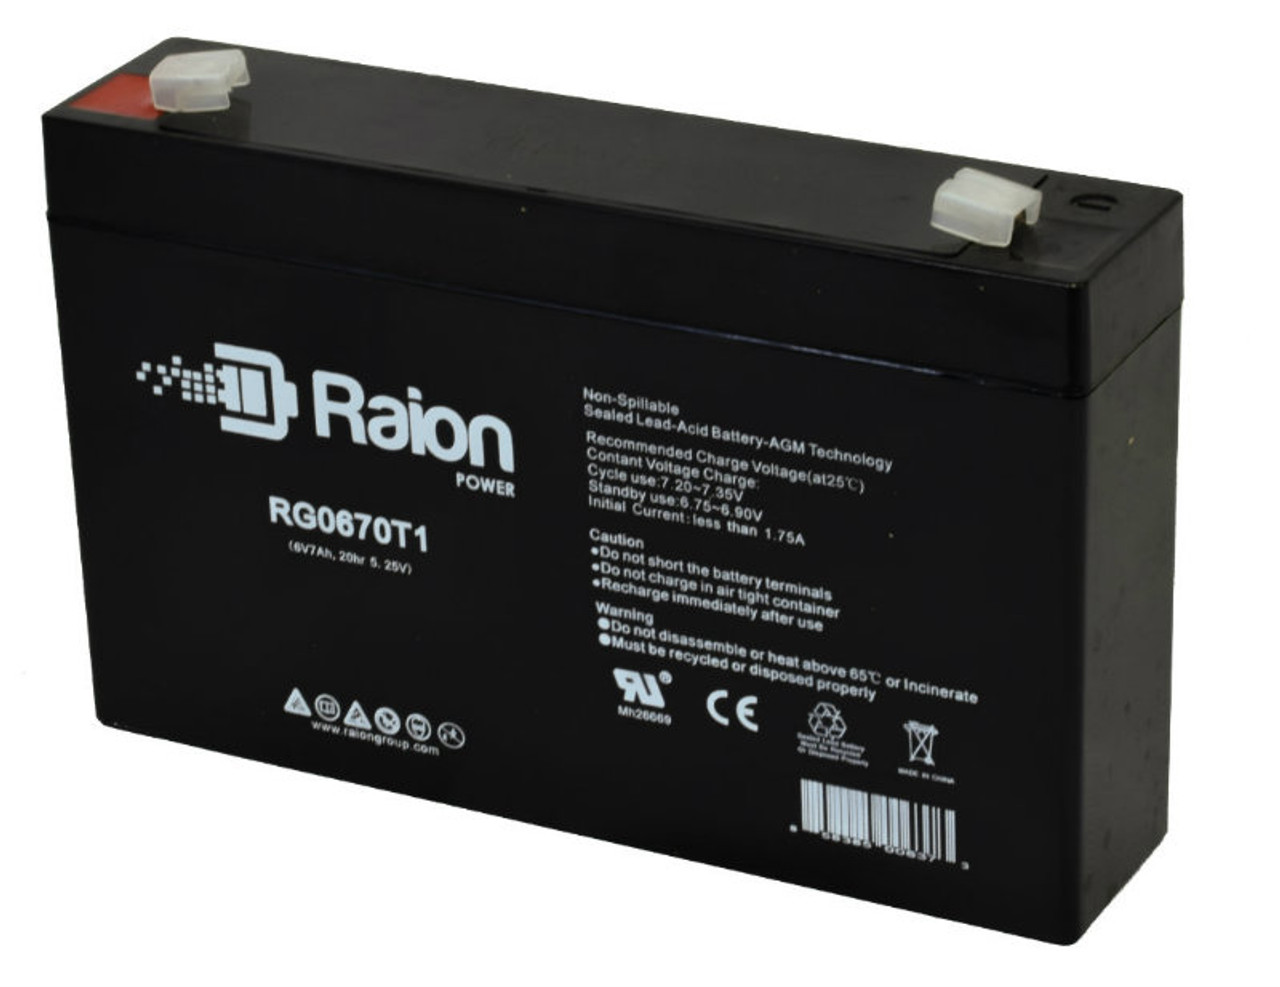 Raion Power RG0670T1 Replacement Battery for MATRIX NP7-6 OEM Battery